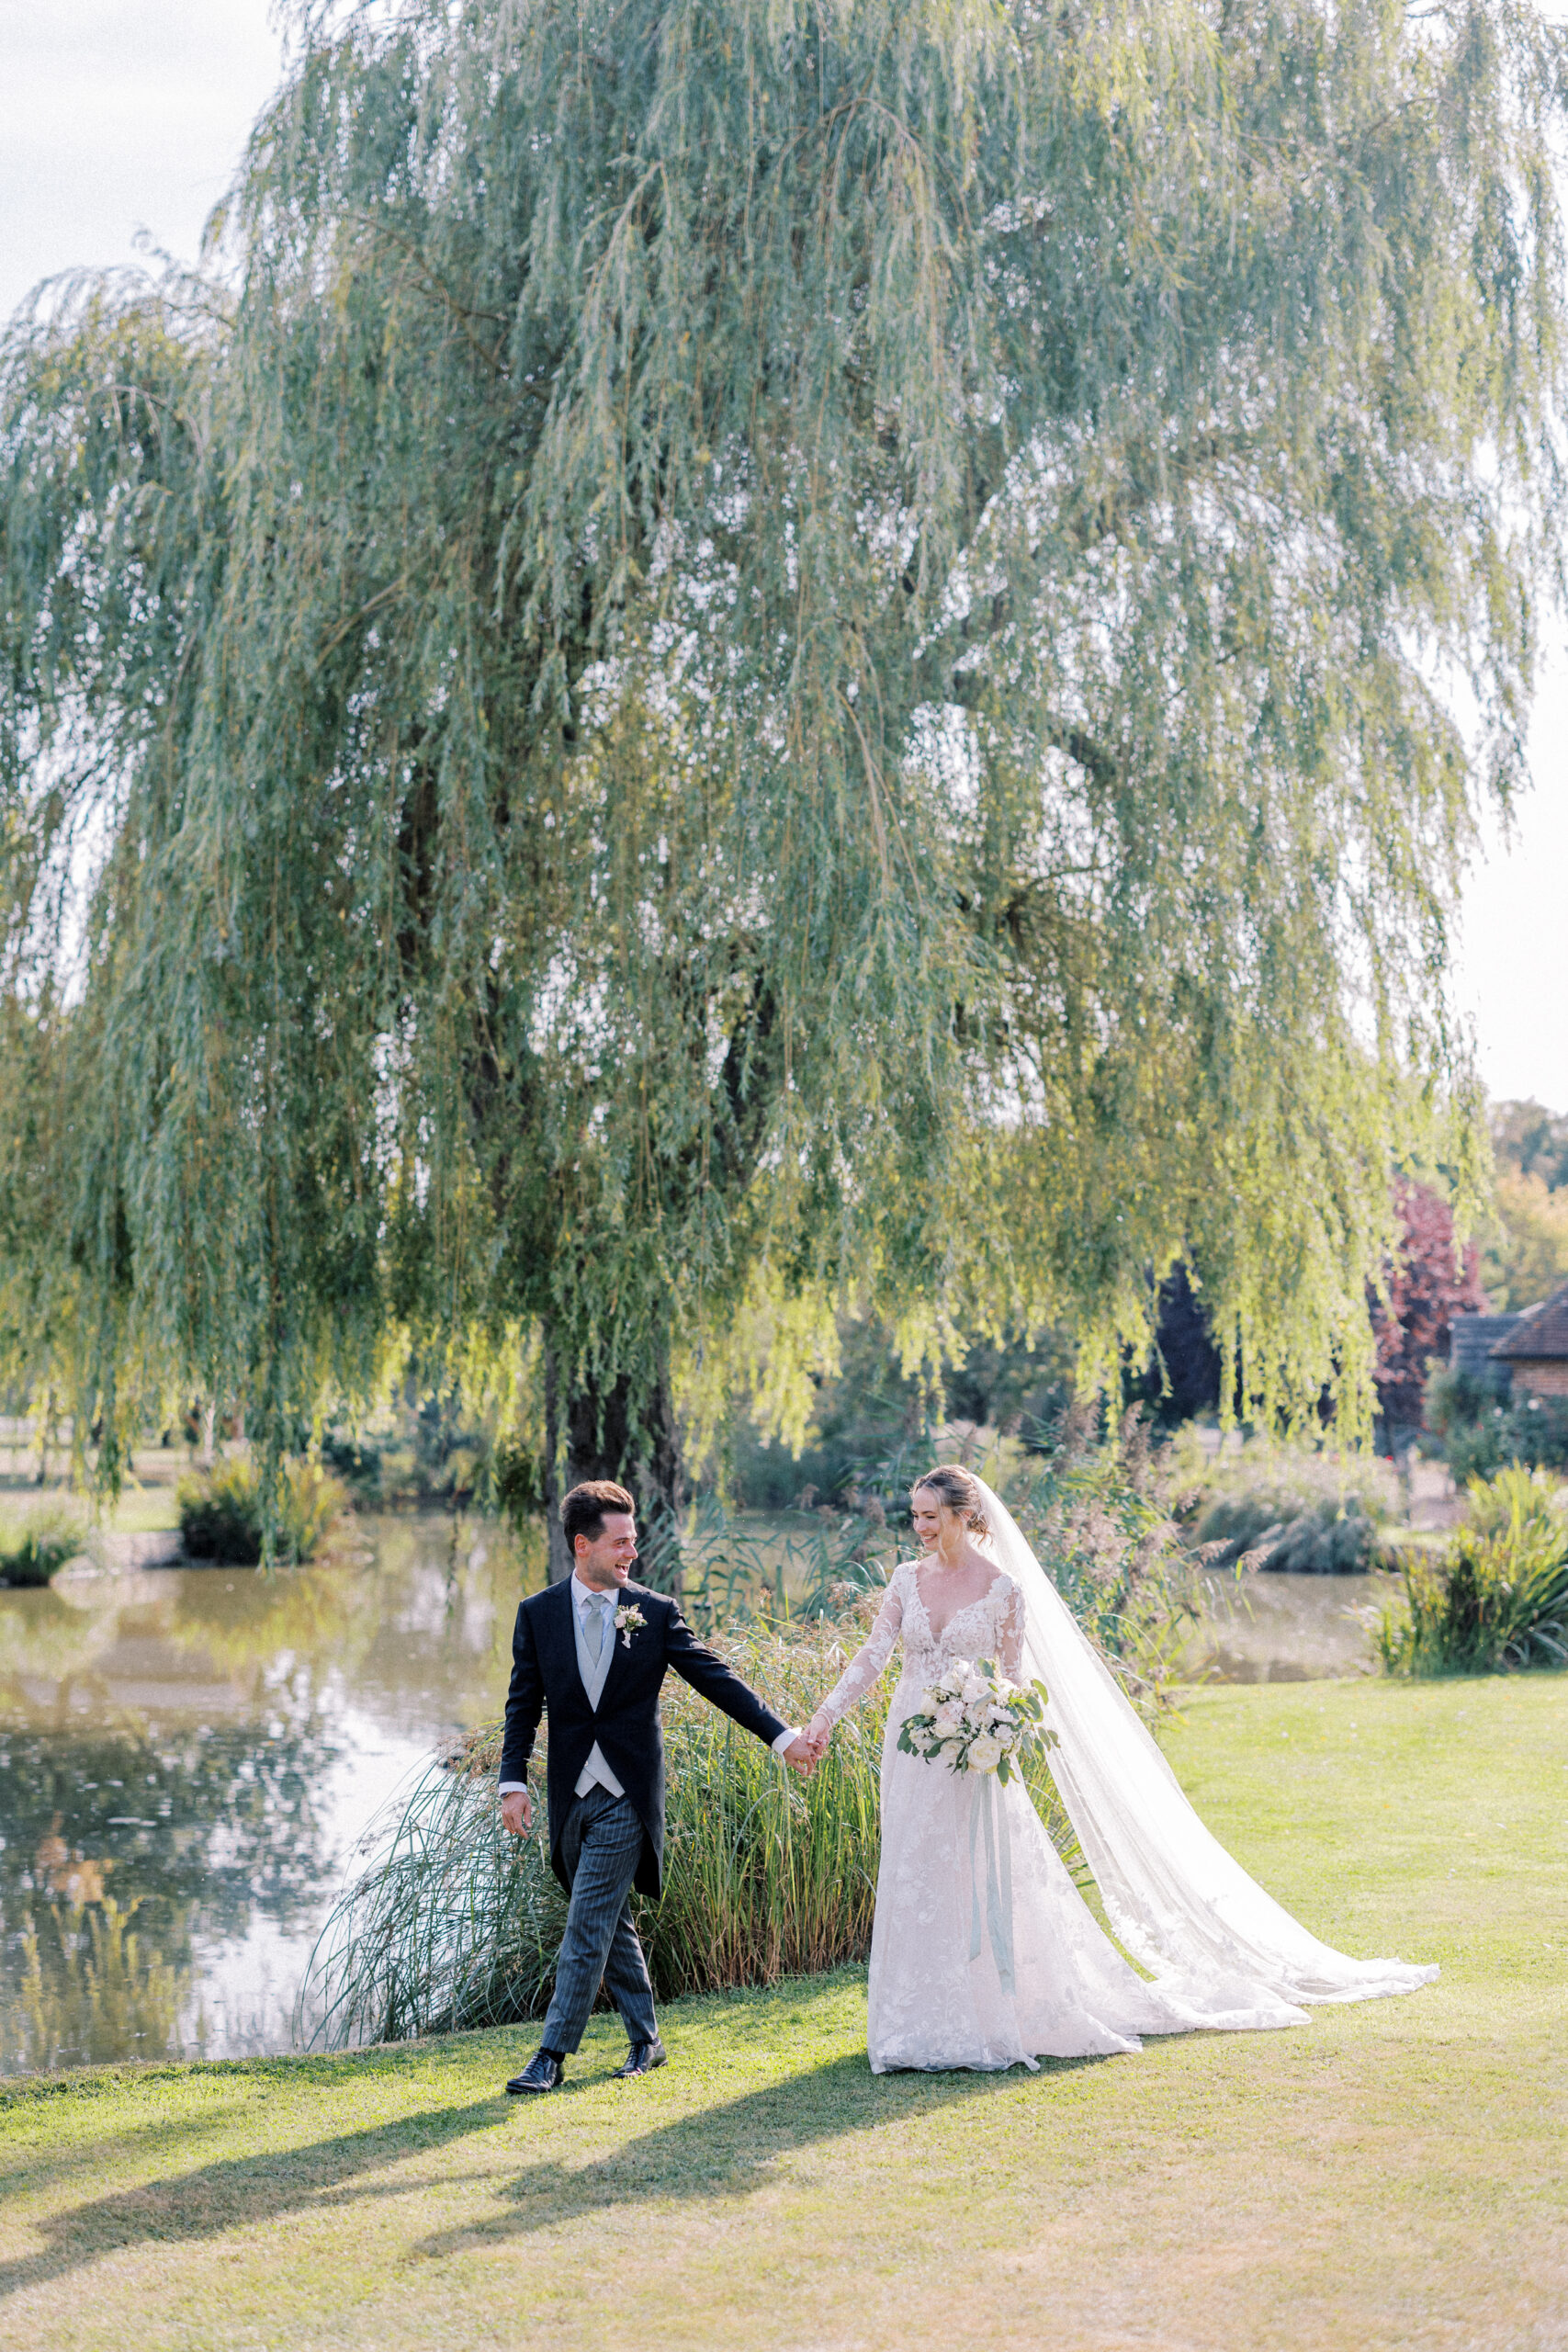 Romantic & Timeless Wedding Photography at Luxury English Country Garden at private family home